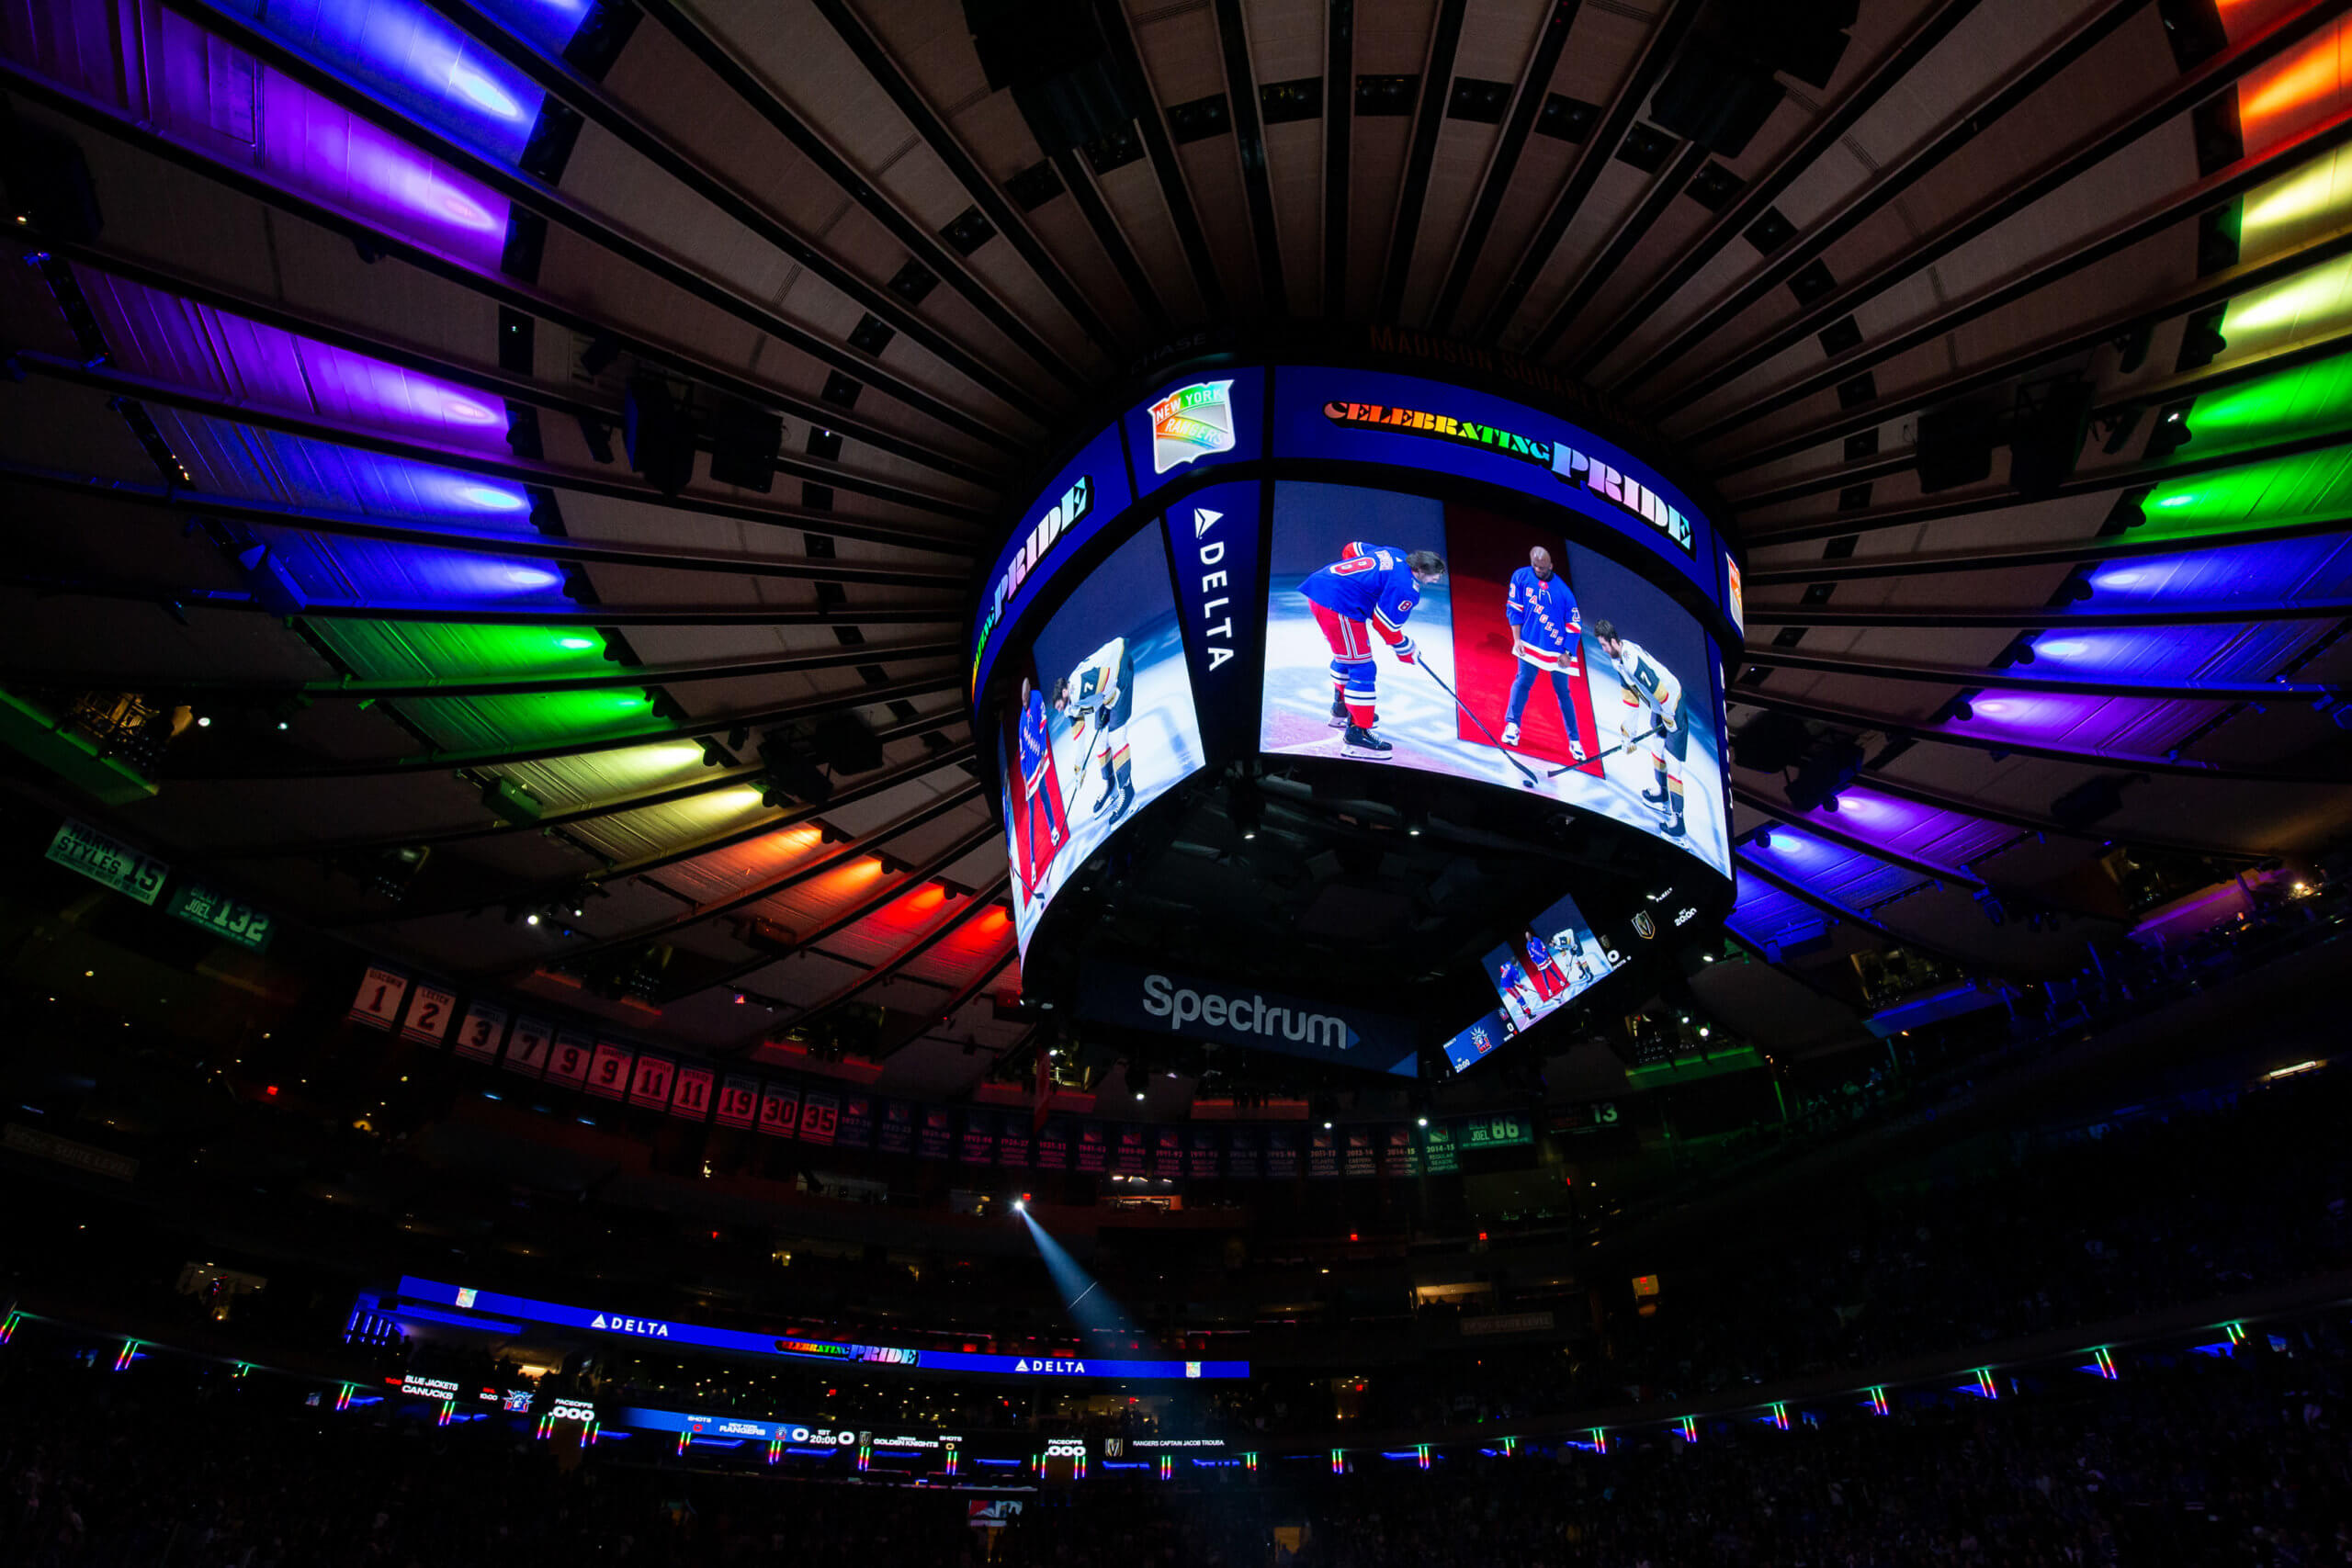 Rangers release statement after not wearing advertised Pride Night